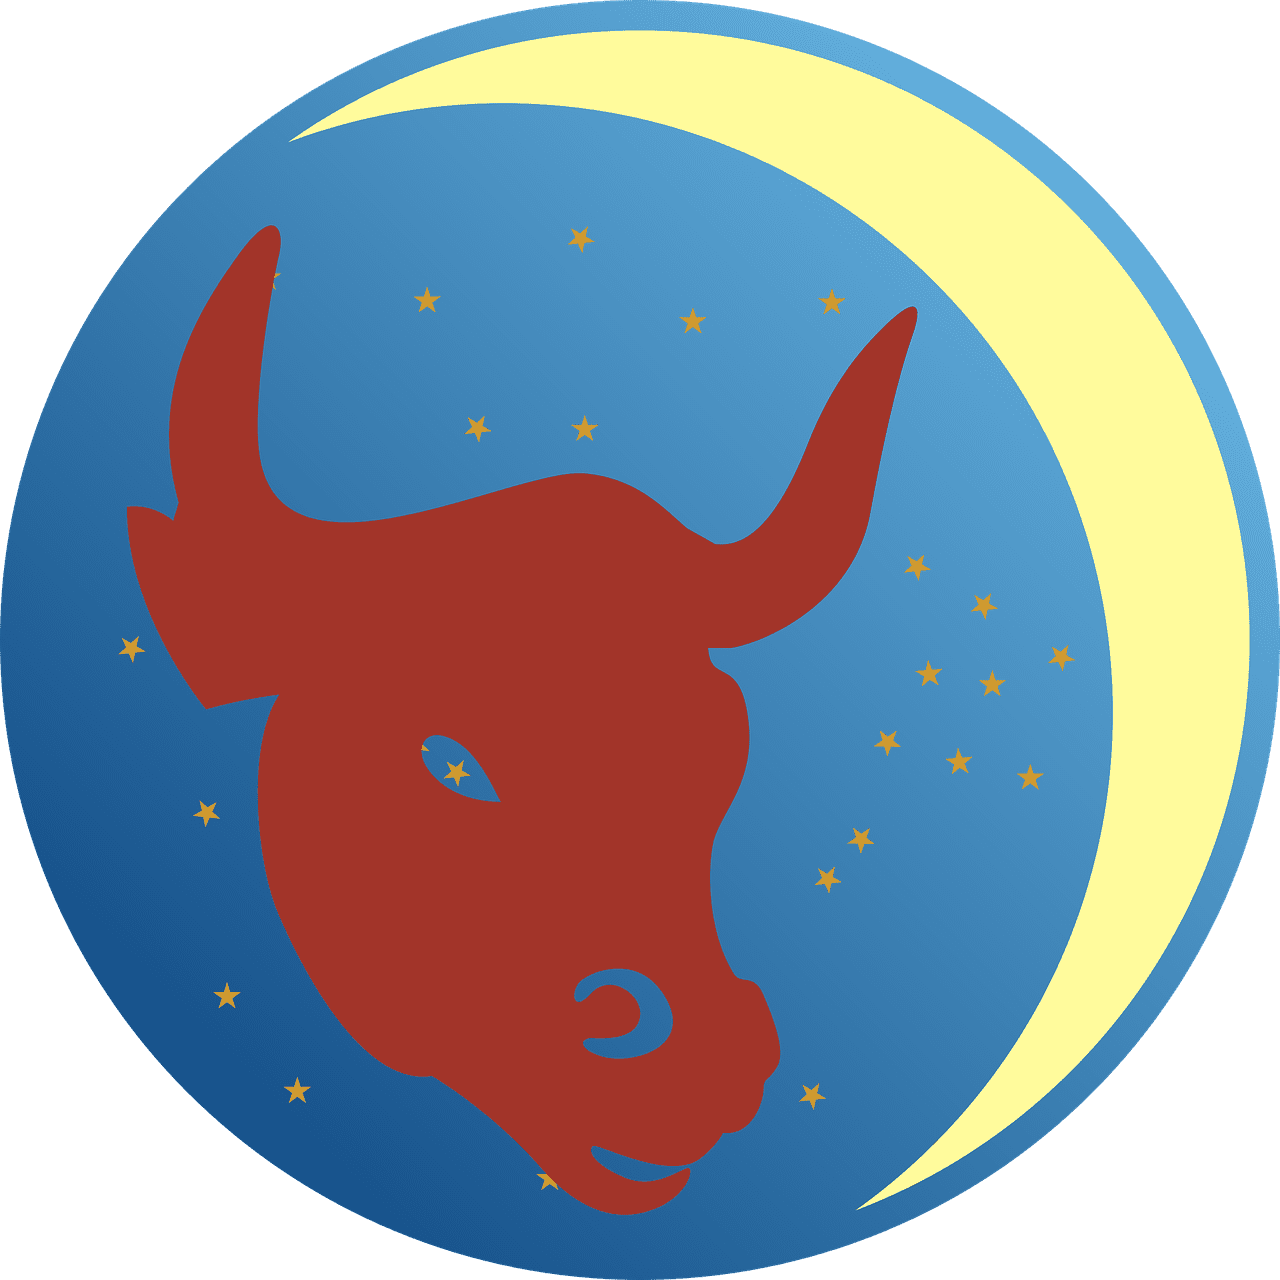 A depiction of the Taurus star sign | Photo: Pixabay/13smok